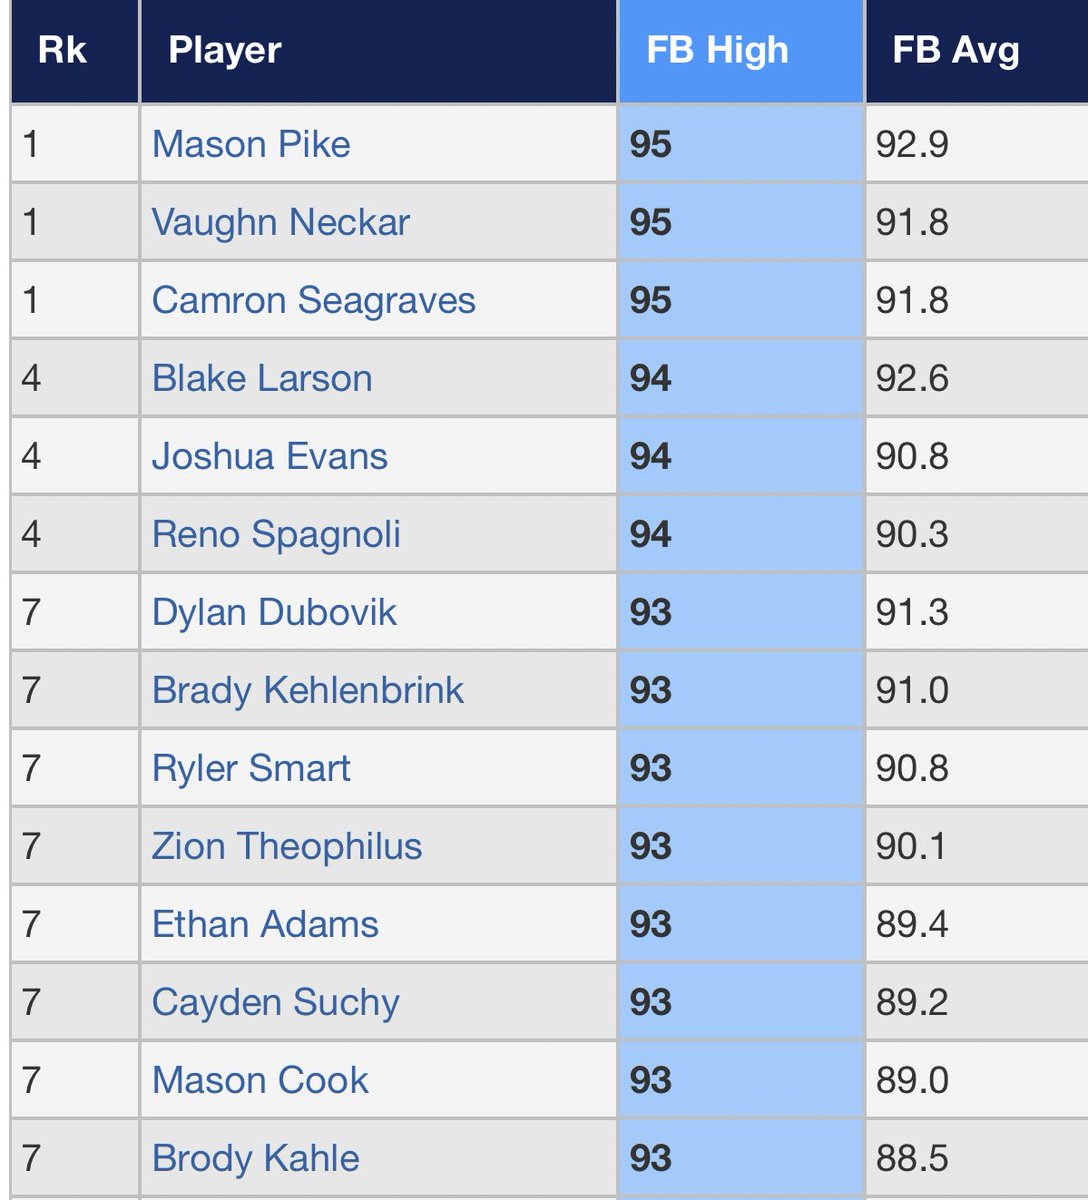 Top FB velos 10/8 at the WWBA World Championship in Jupiter

#WWBAWorlds 

perfectgame.org/Events/Stats/D…